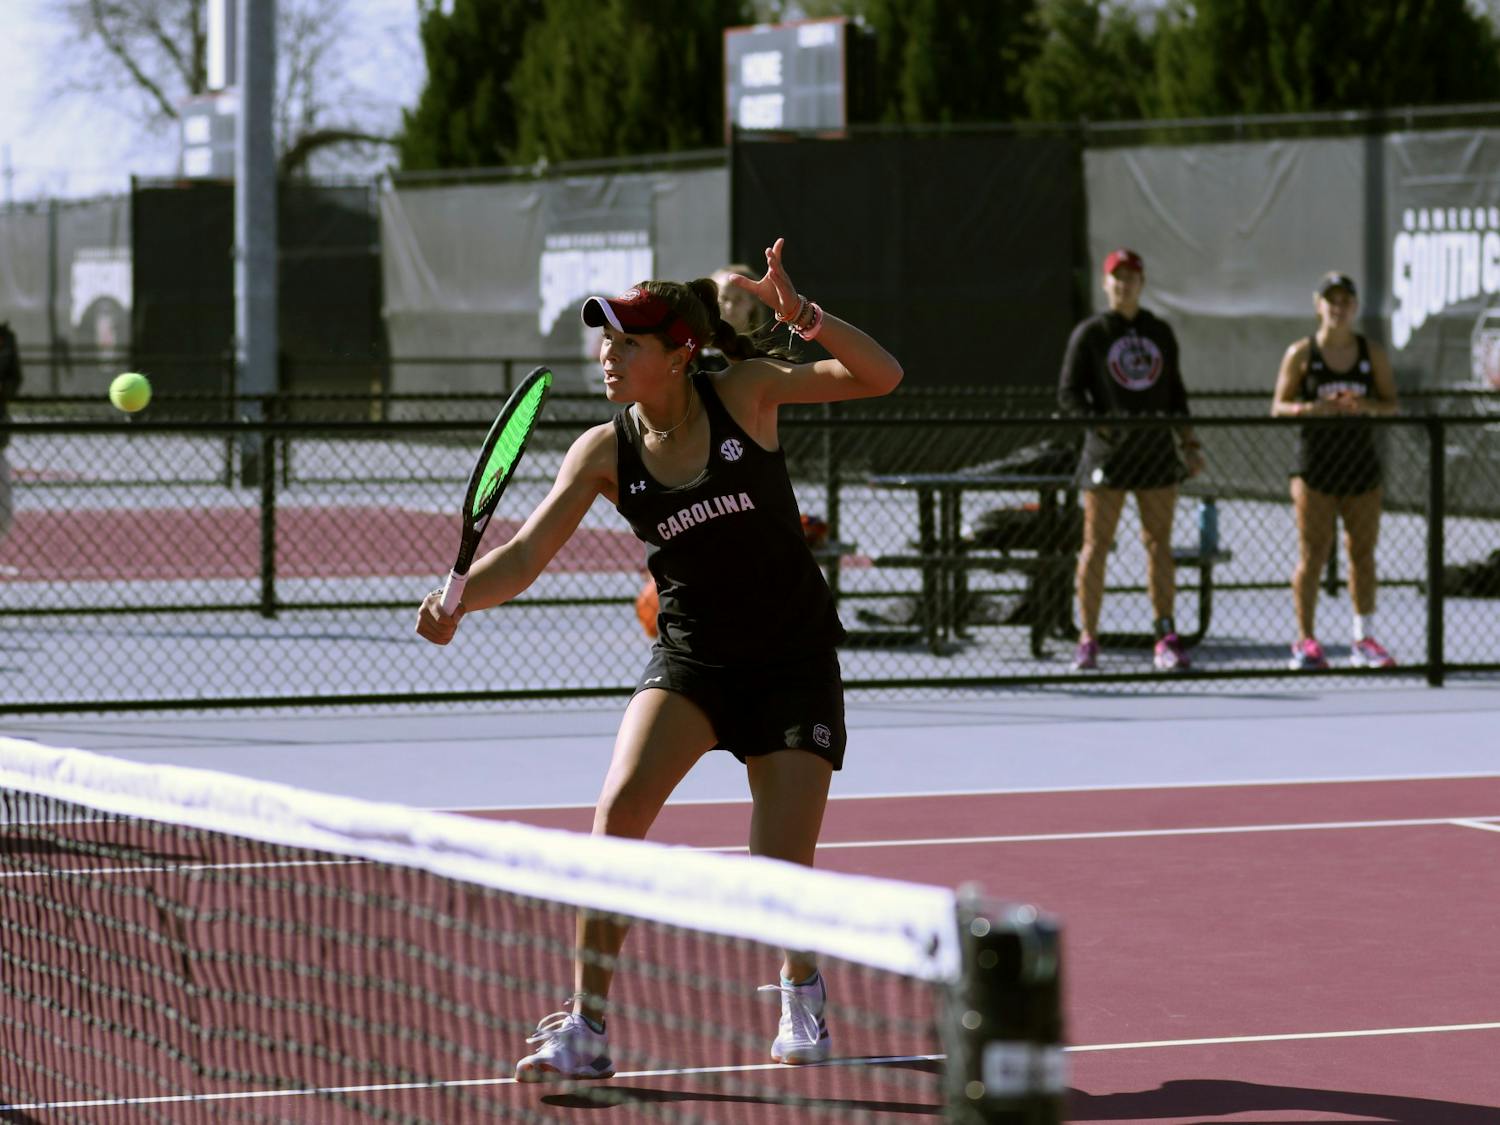 Freshman Emma Shelton hits a volley during a doubles match against Clemson on Jan. 30, 2020. Overall, the Gamecocks beat Clemson 6-1.